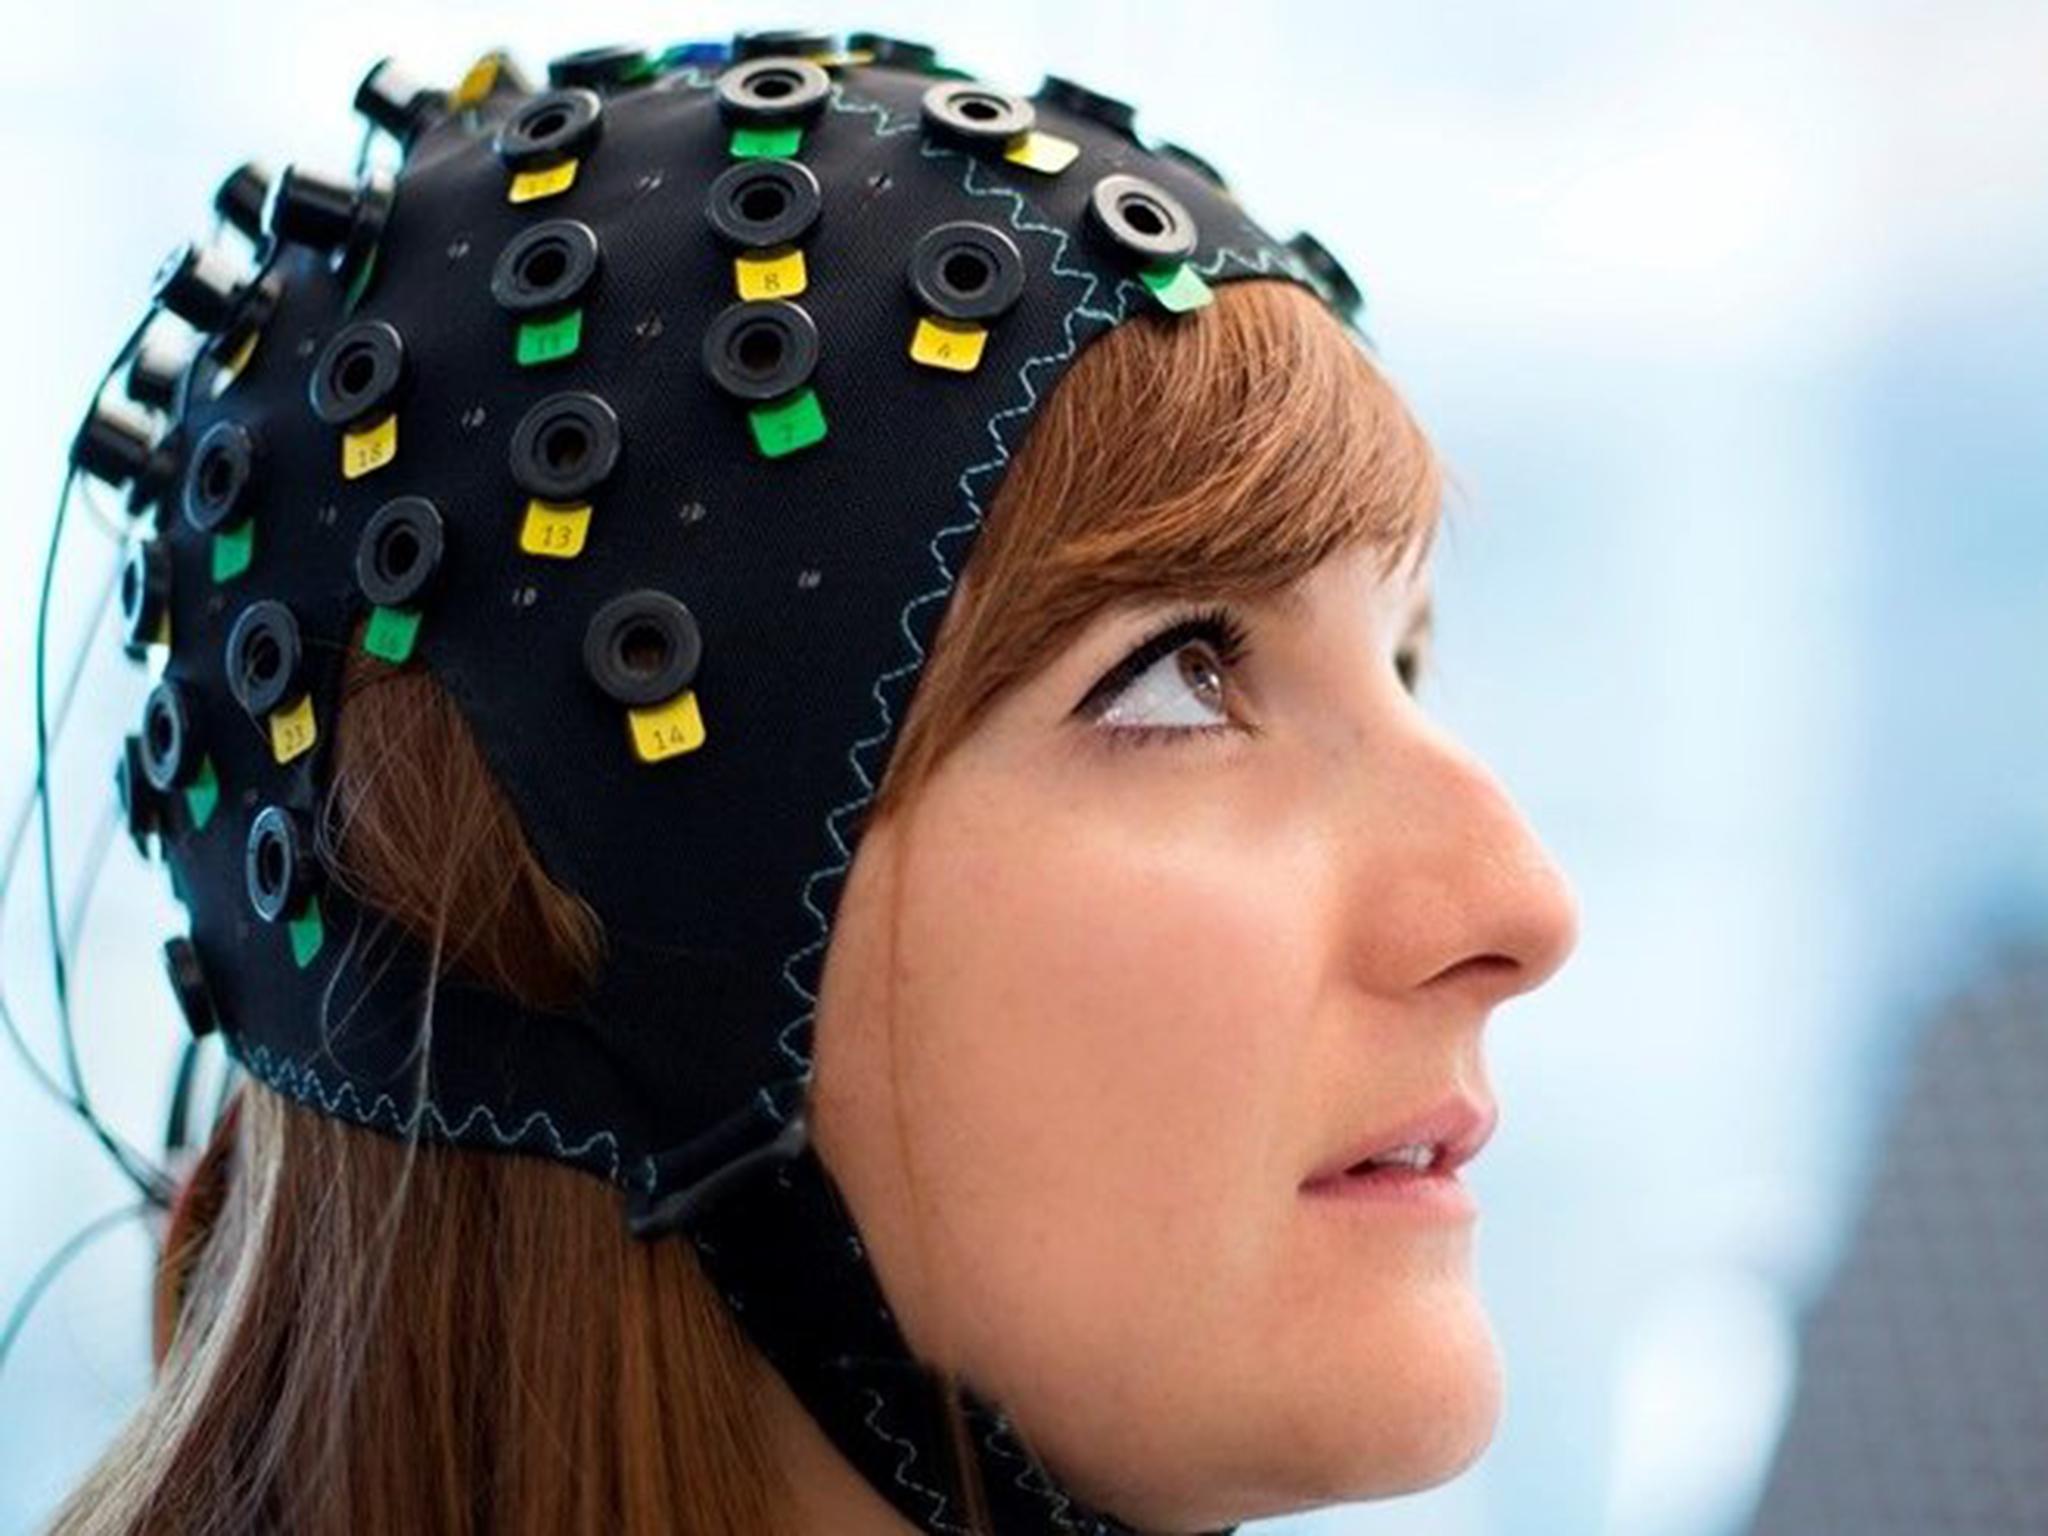 The cap uses infrared light to spot variations in blood flow in different regions of the brain